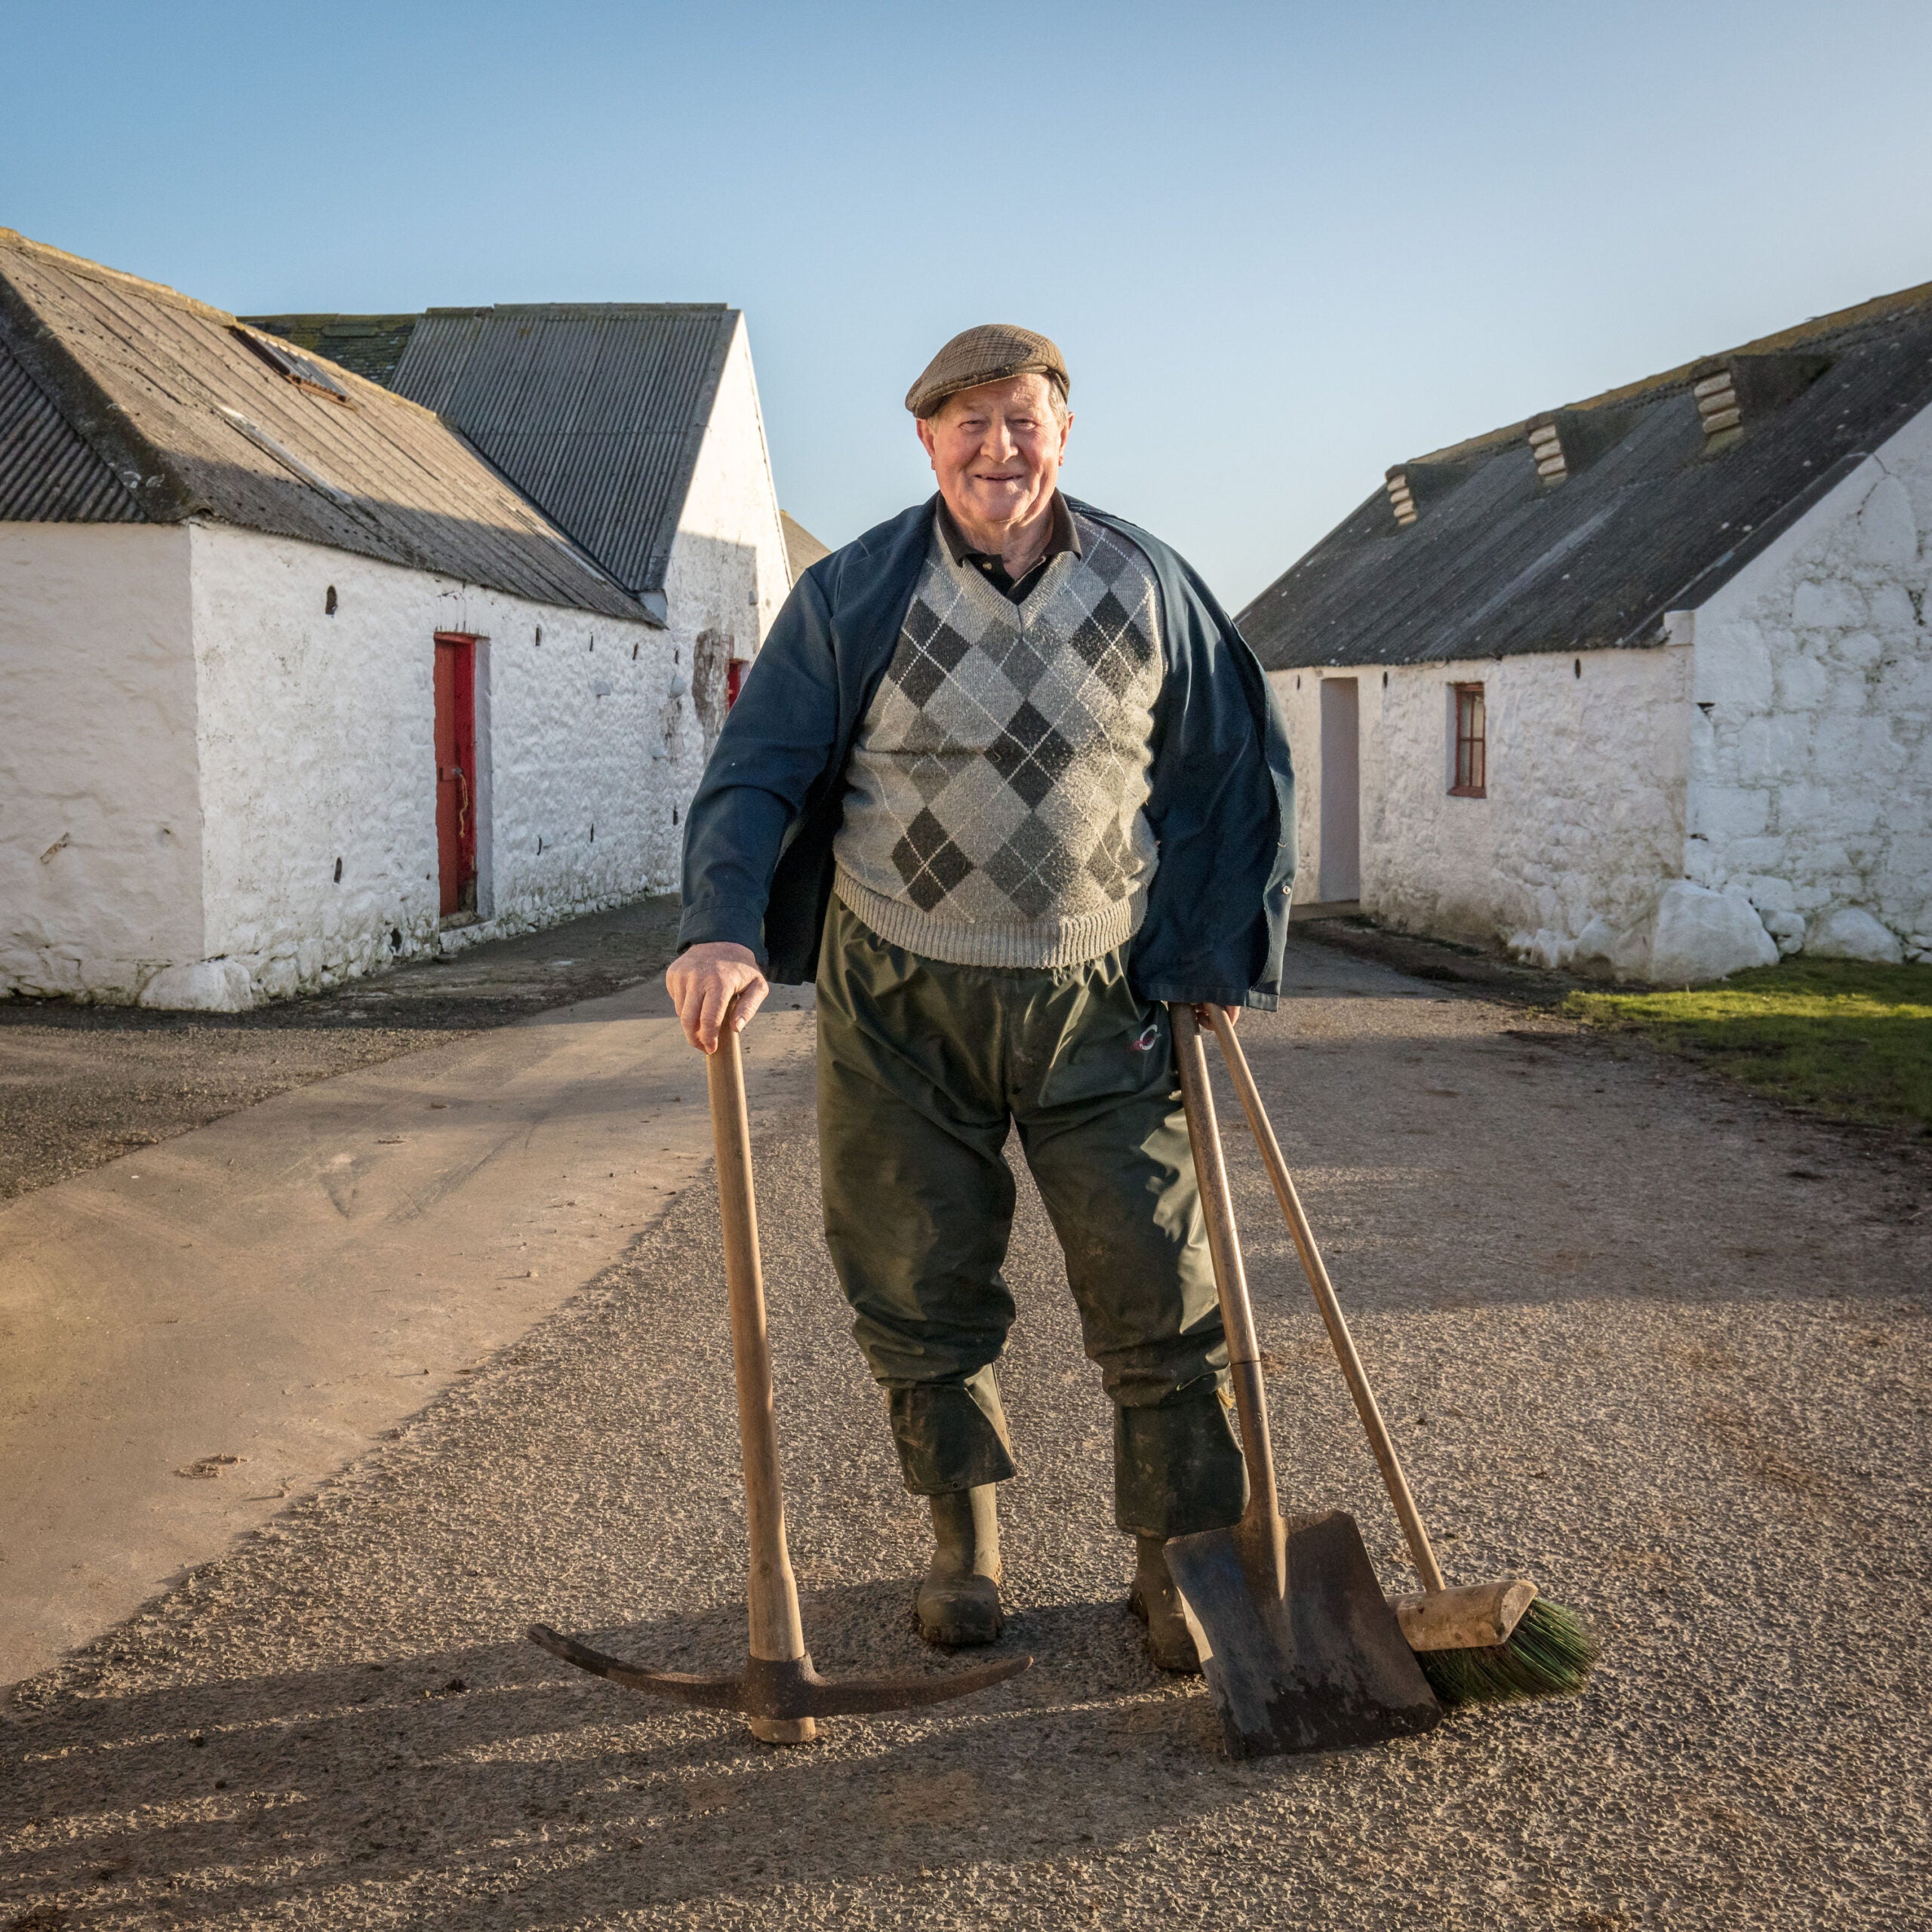 Hughes of Knockencule Farm on the way to feed his cows.